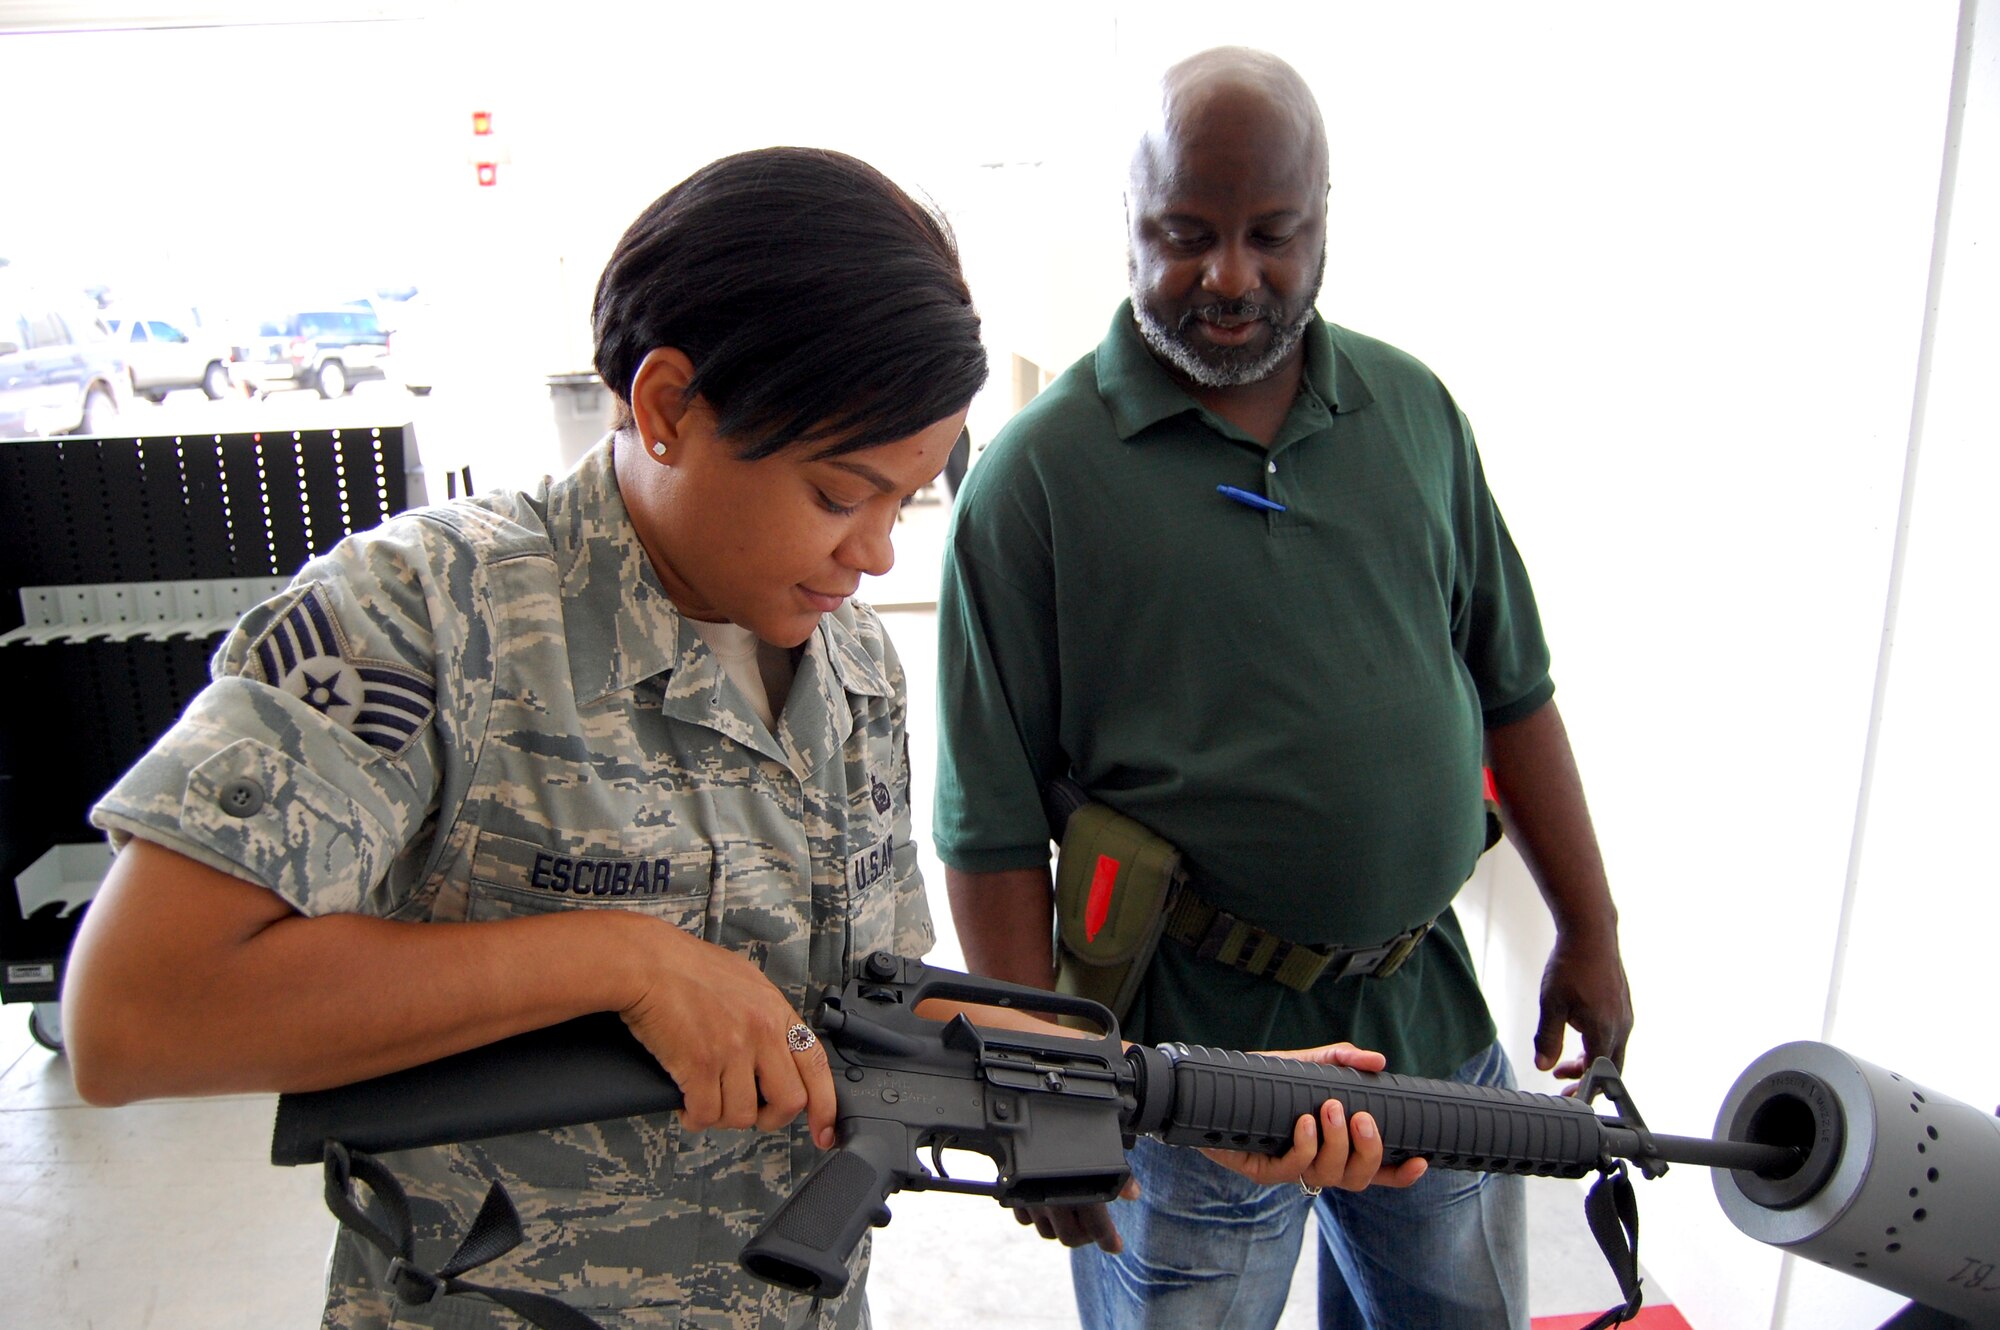 Jerry Lewis, 902nd Logistics Readiness Squadron, right, guides Staff Sgt. Jessica Escobar, Air Force Personnel Center Unit Deployment manager, through the M-16 rifle clearing procedures, at the 902nd Logistics Readiness Squadron Mobility Processing Center on Randolph Air Force Base Aug. 10. During exercise Joint Base San Antonio 10-08, more than 200 Airmen from different agencies on Randolph AFB participated in the two-day deployment exercise. (U.S. Air Force photo/Master Sgt. Paul Kilgallon)